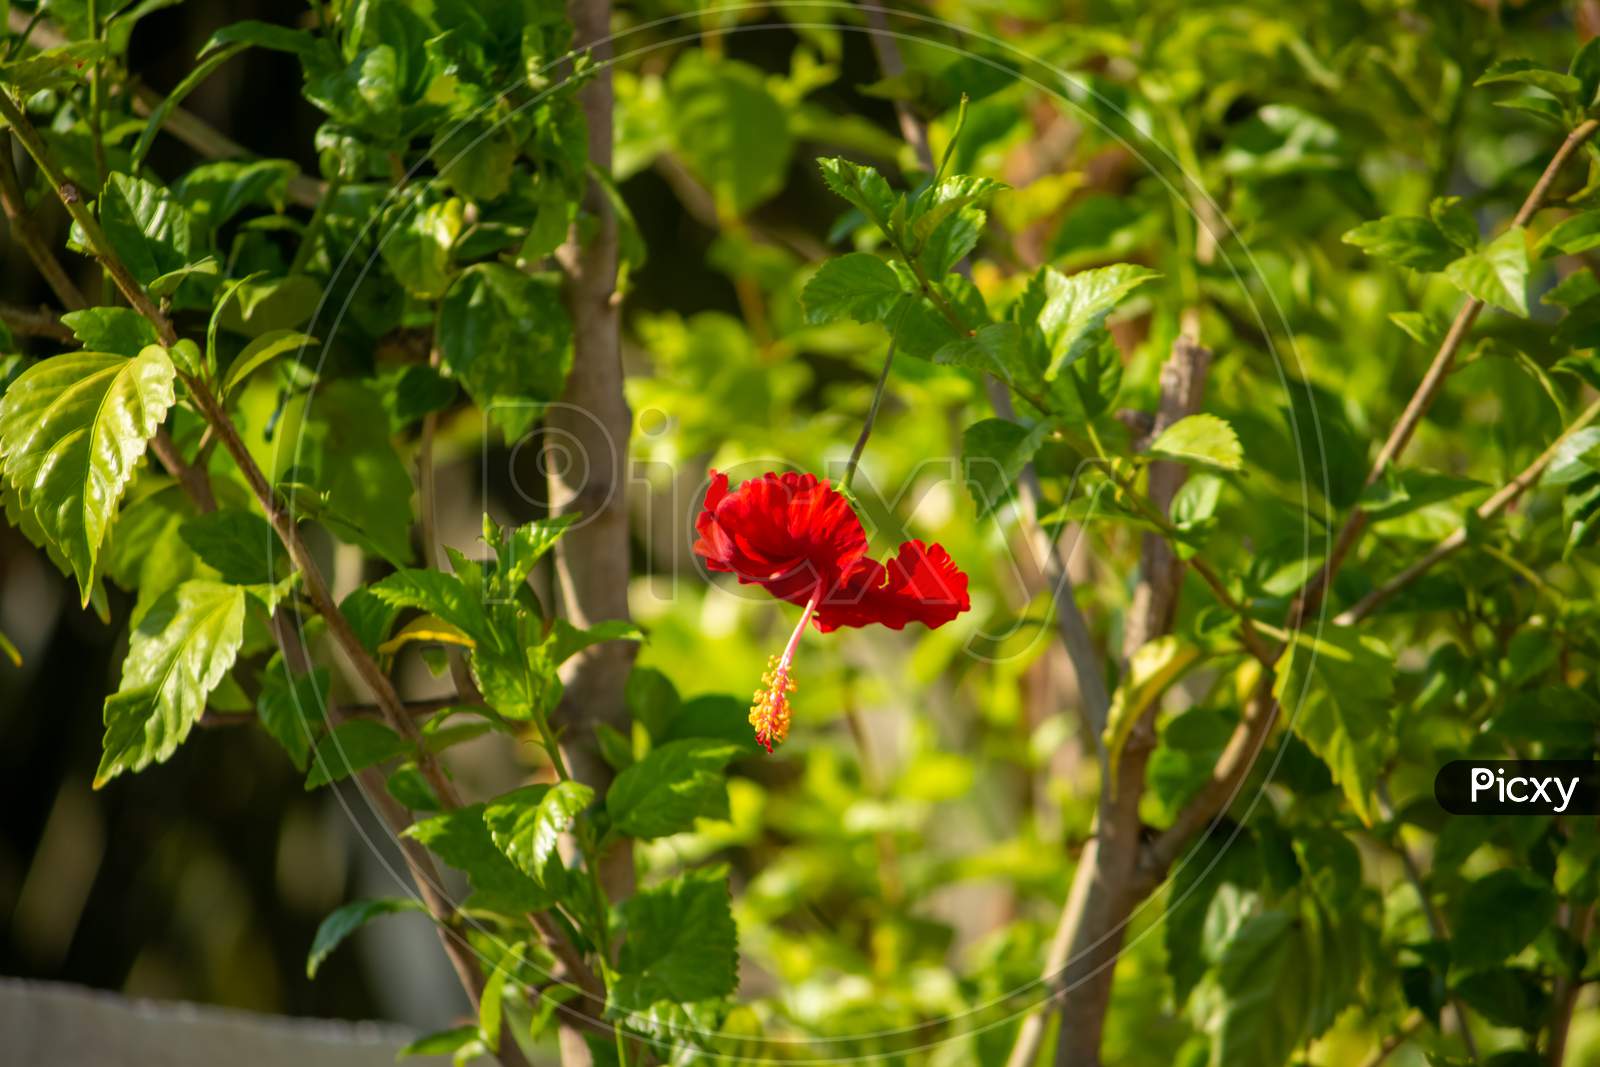 Red Hibiscus Rosa-Sinensis, Colloquially As Chinese Hibiscus, China Rose, Hawaiian Hibiscus, Rose Mallow & Shoeblackplant, Is A Species Of Tropical Hibiscus, Hibisceae Tribe Of The Family Malvaceae